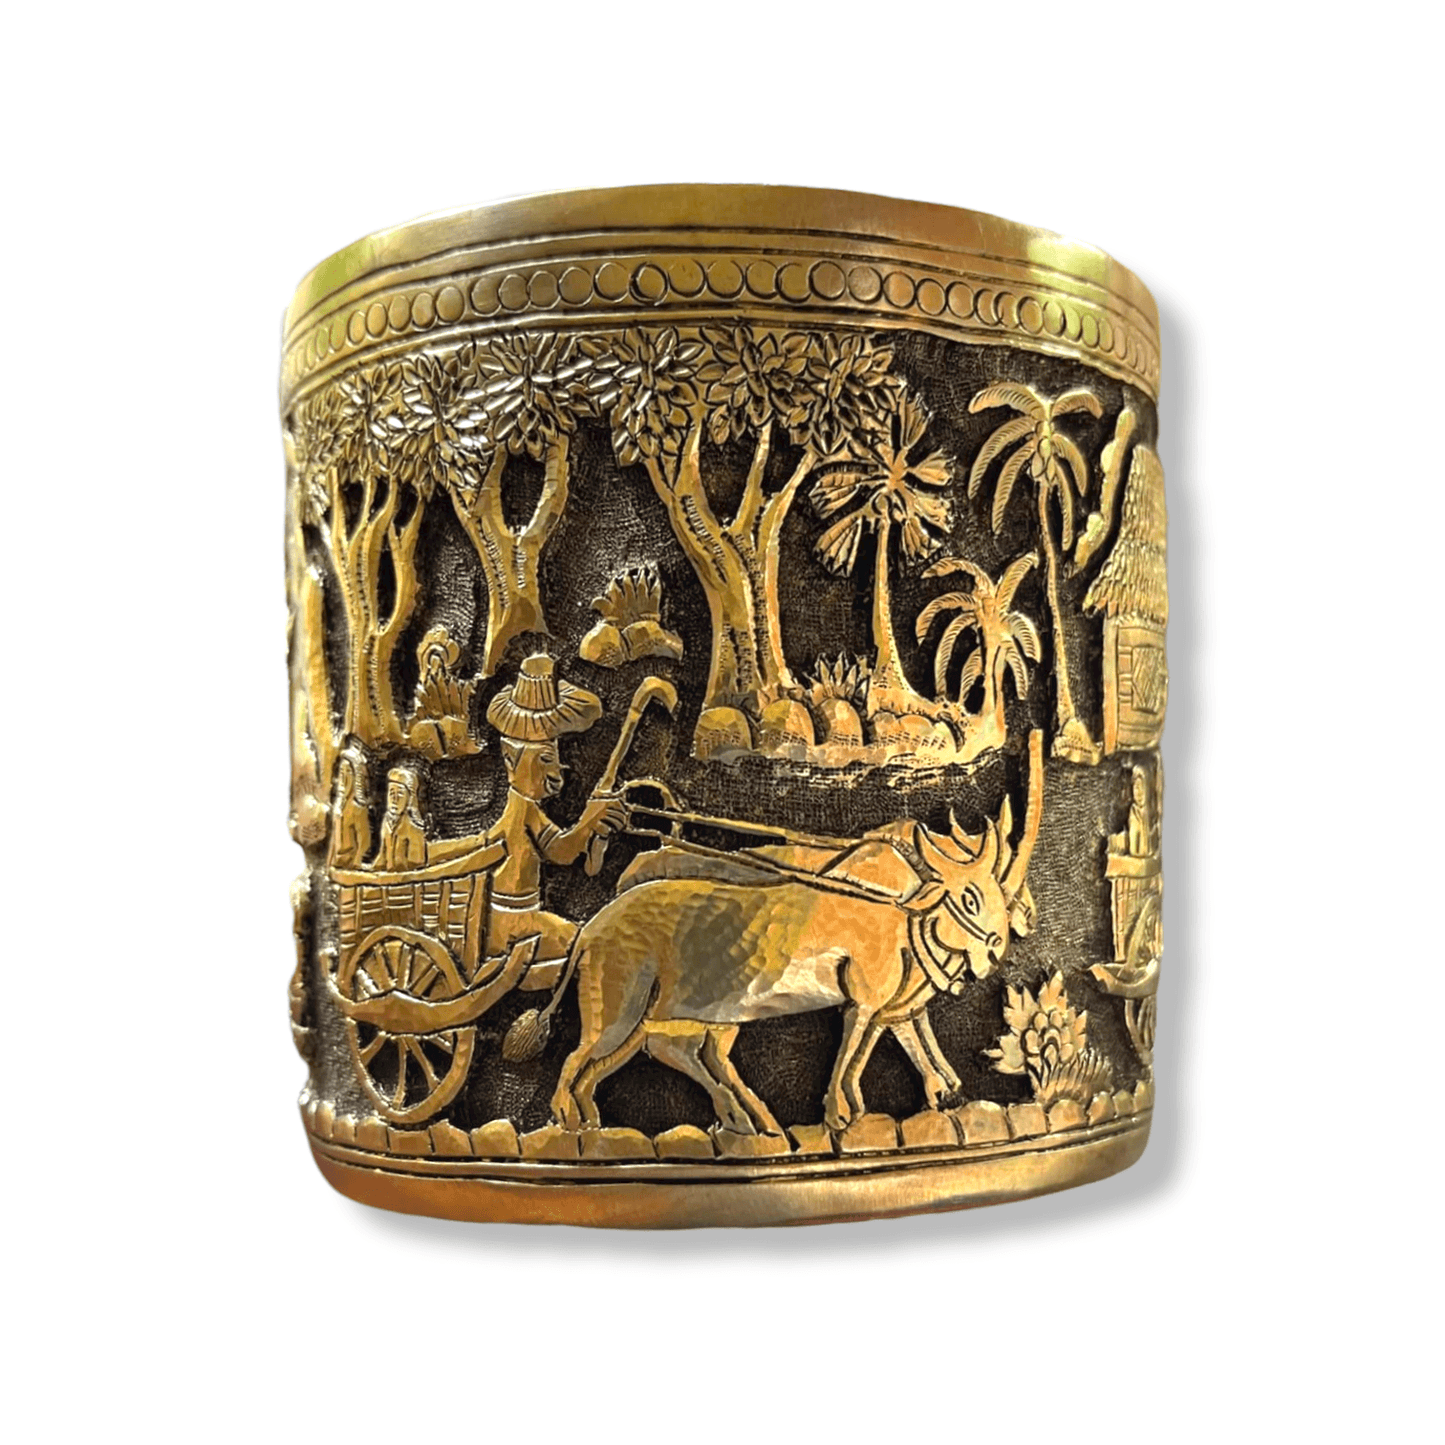 Hand Engraved Solid Brass Mug with Handle - Floral Art Hand Engraved Solid Brass Mug with Handle - Khmer Rural Hand Engraved Solid Brass Mug with Handle - Khmer Rural 